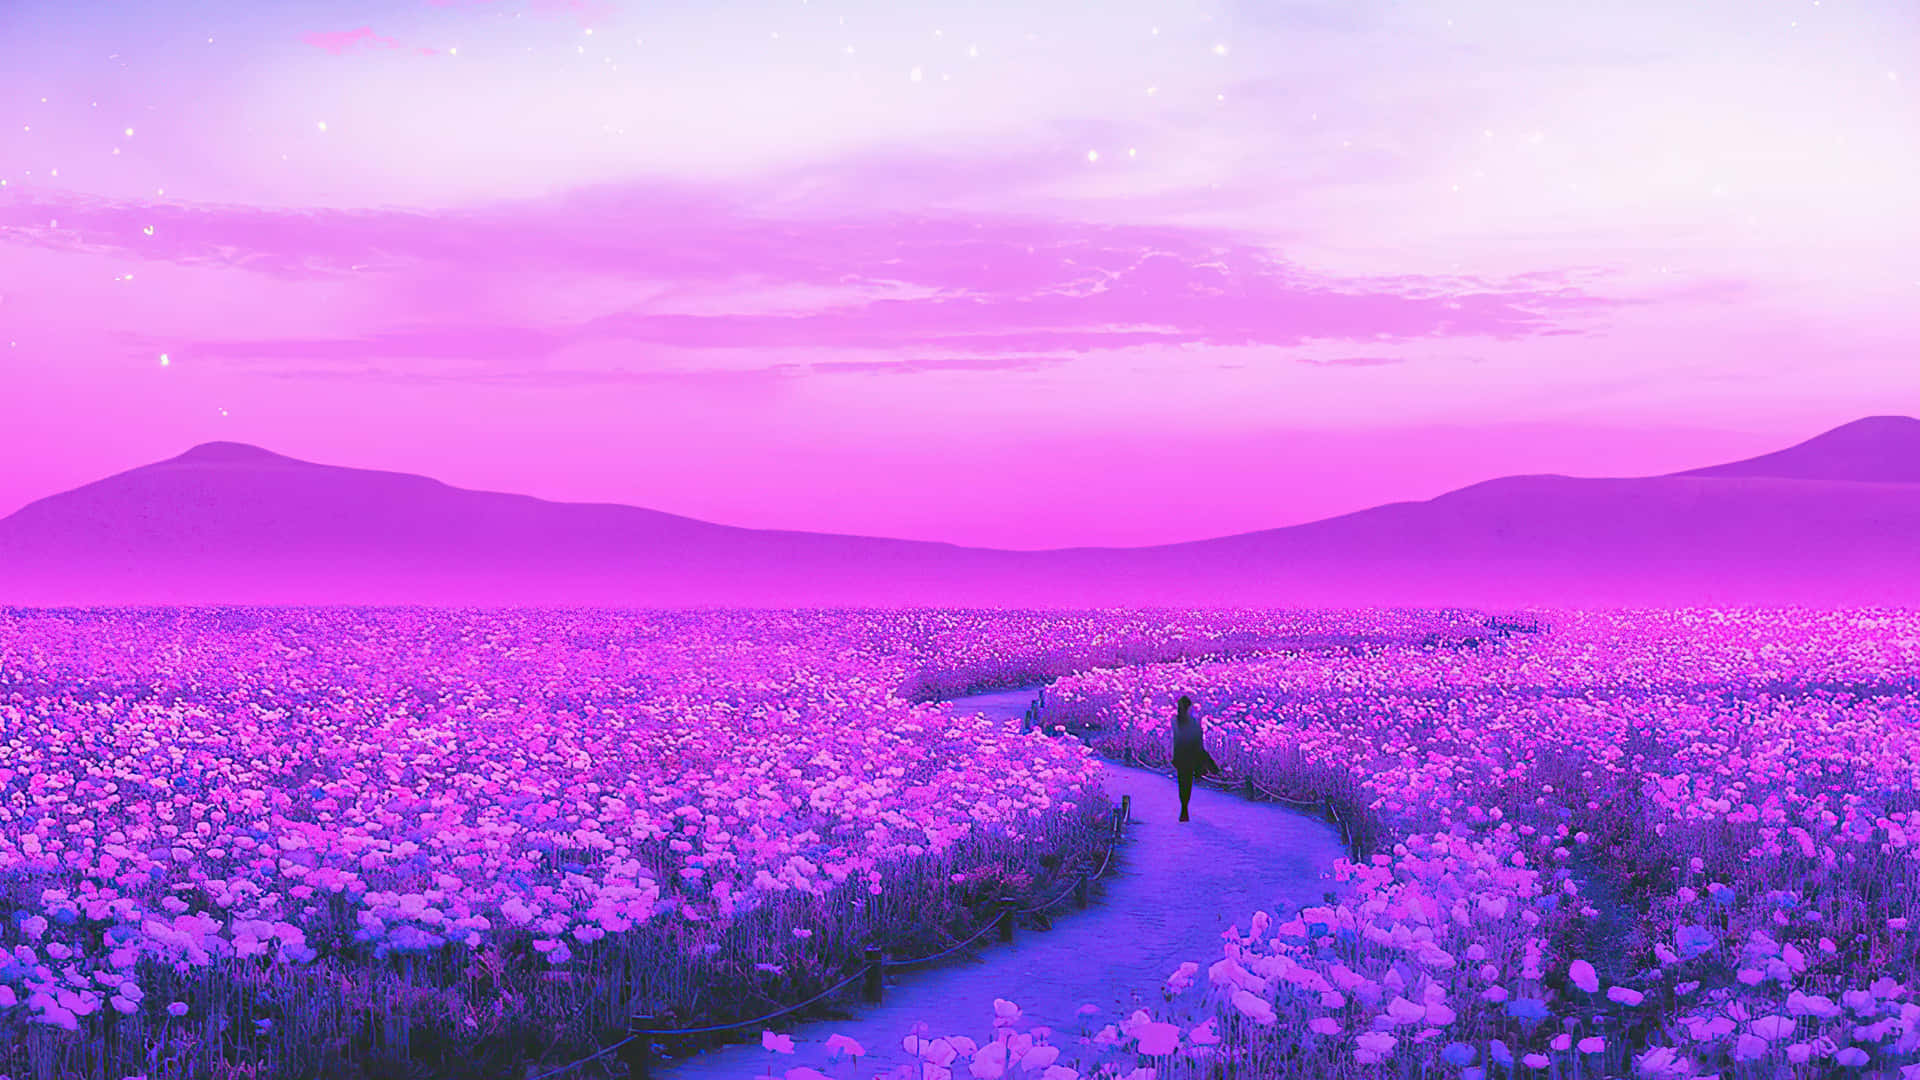 1.  Take in the breathtaking view of this fragrant lavender field